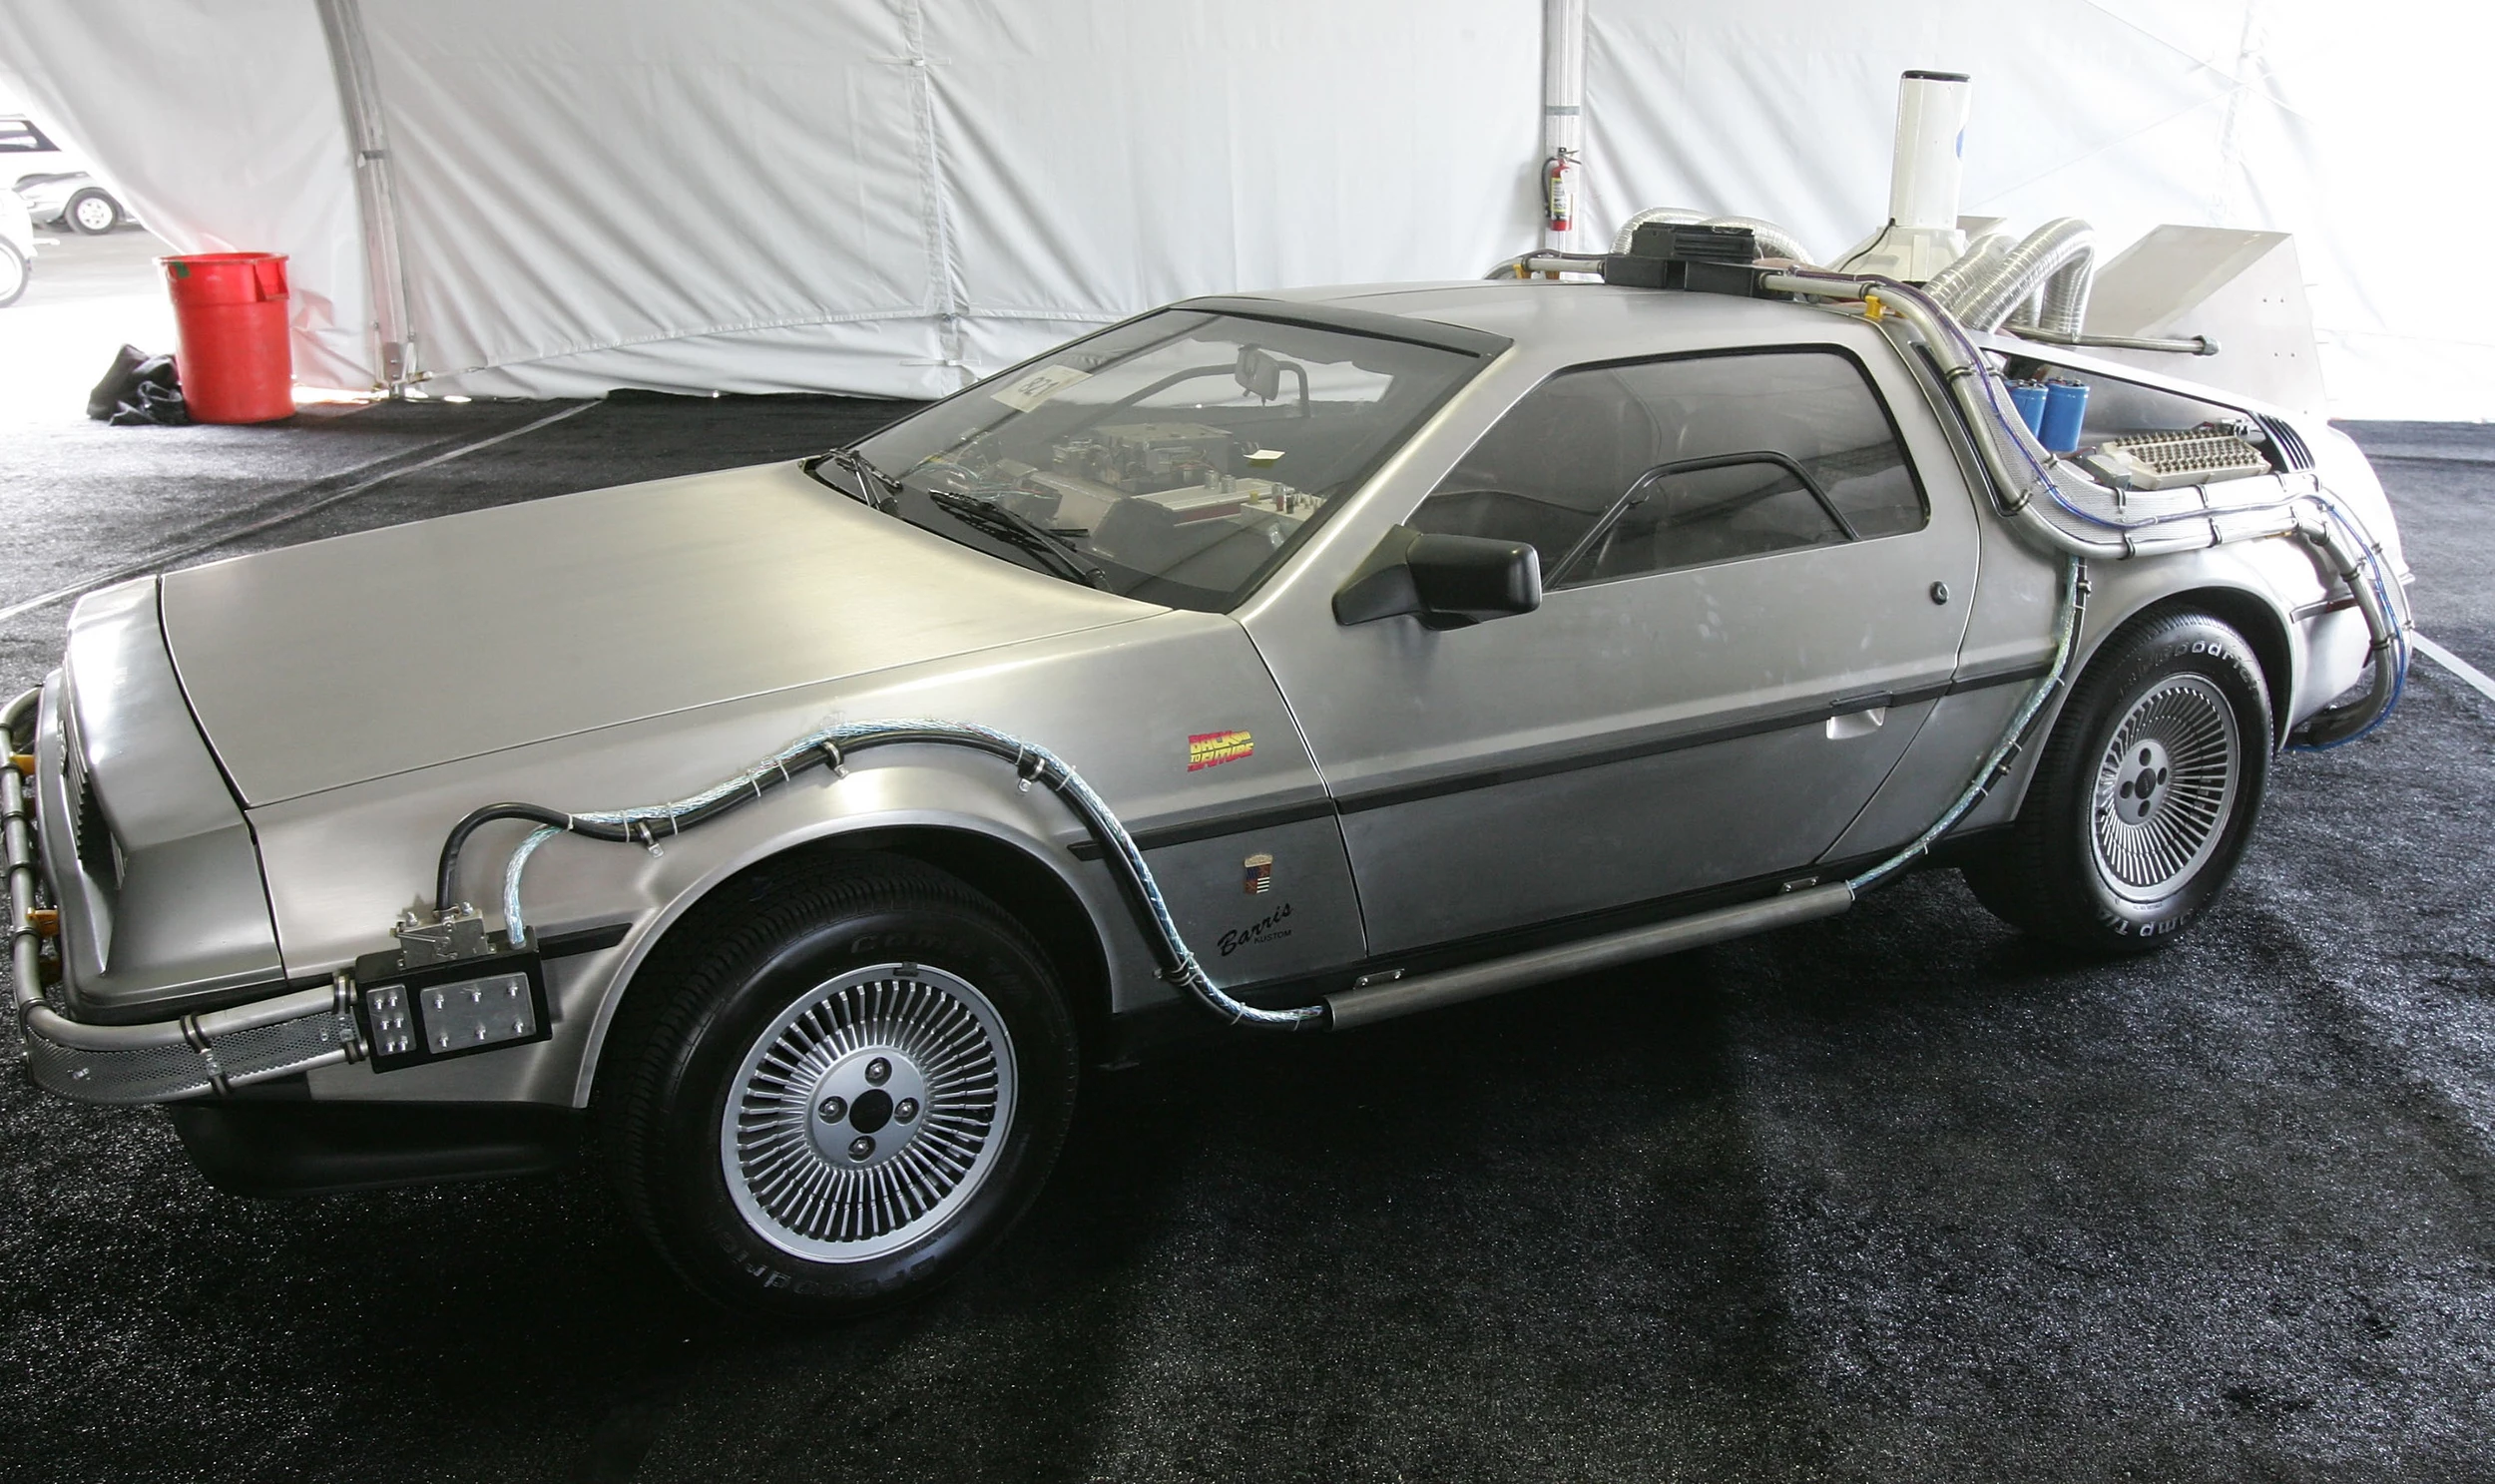 If Cubs Win '15 World Series, Museum to Raffle Back to the Future Car